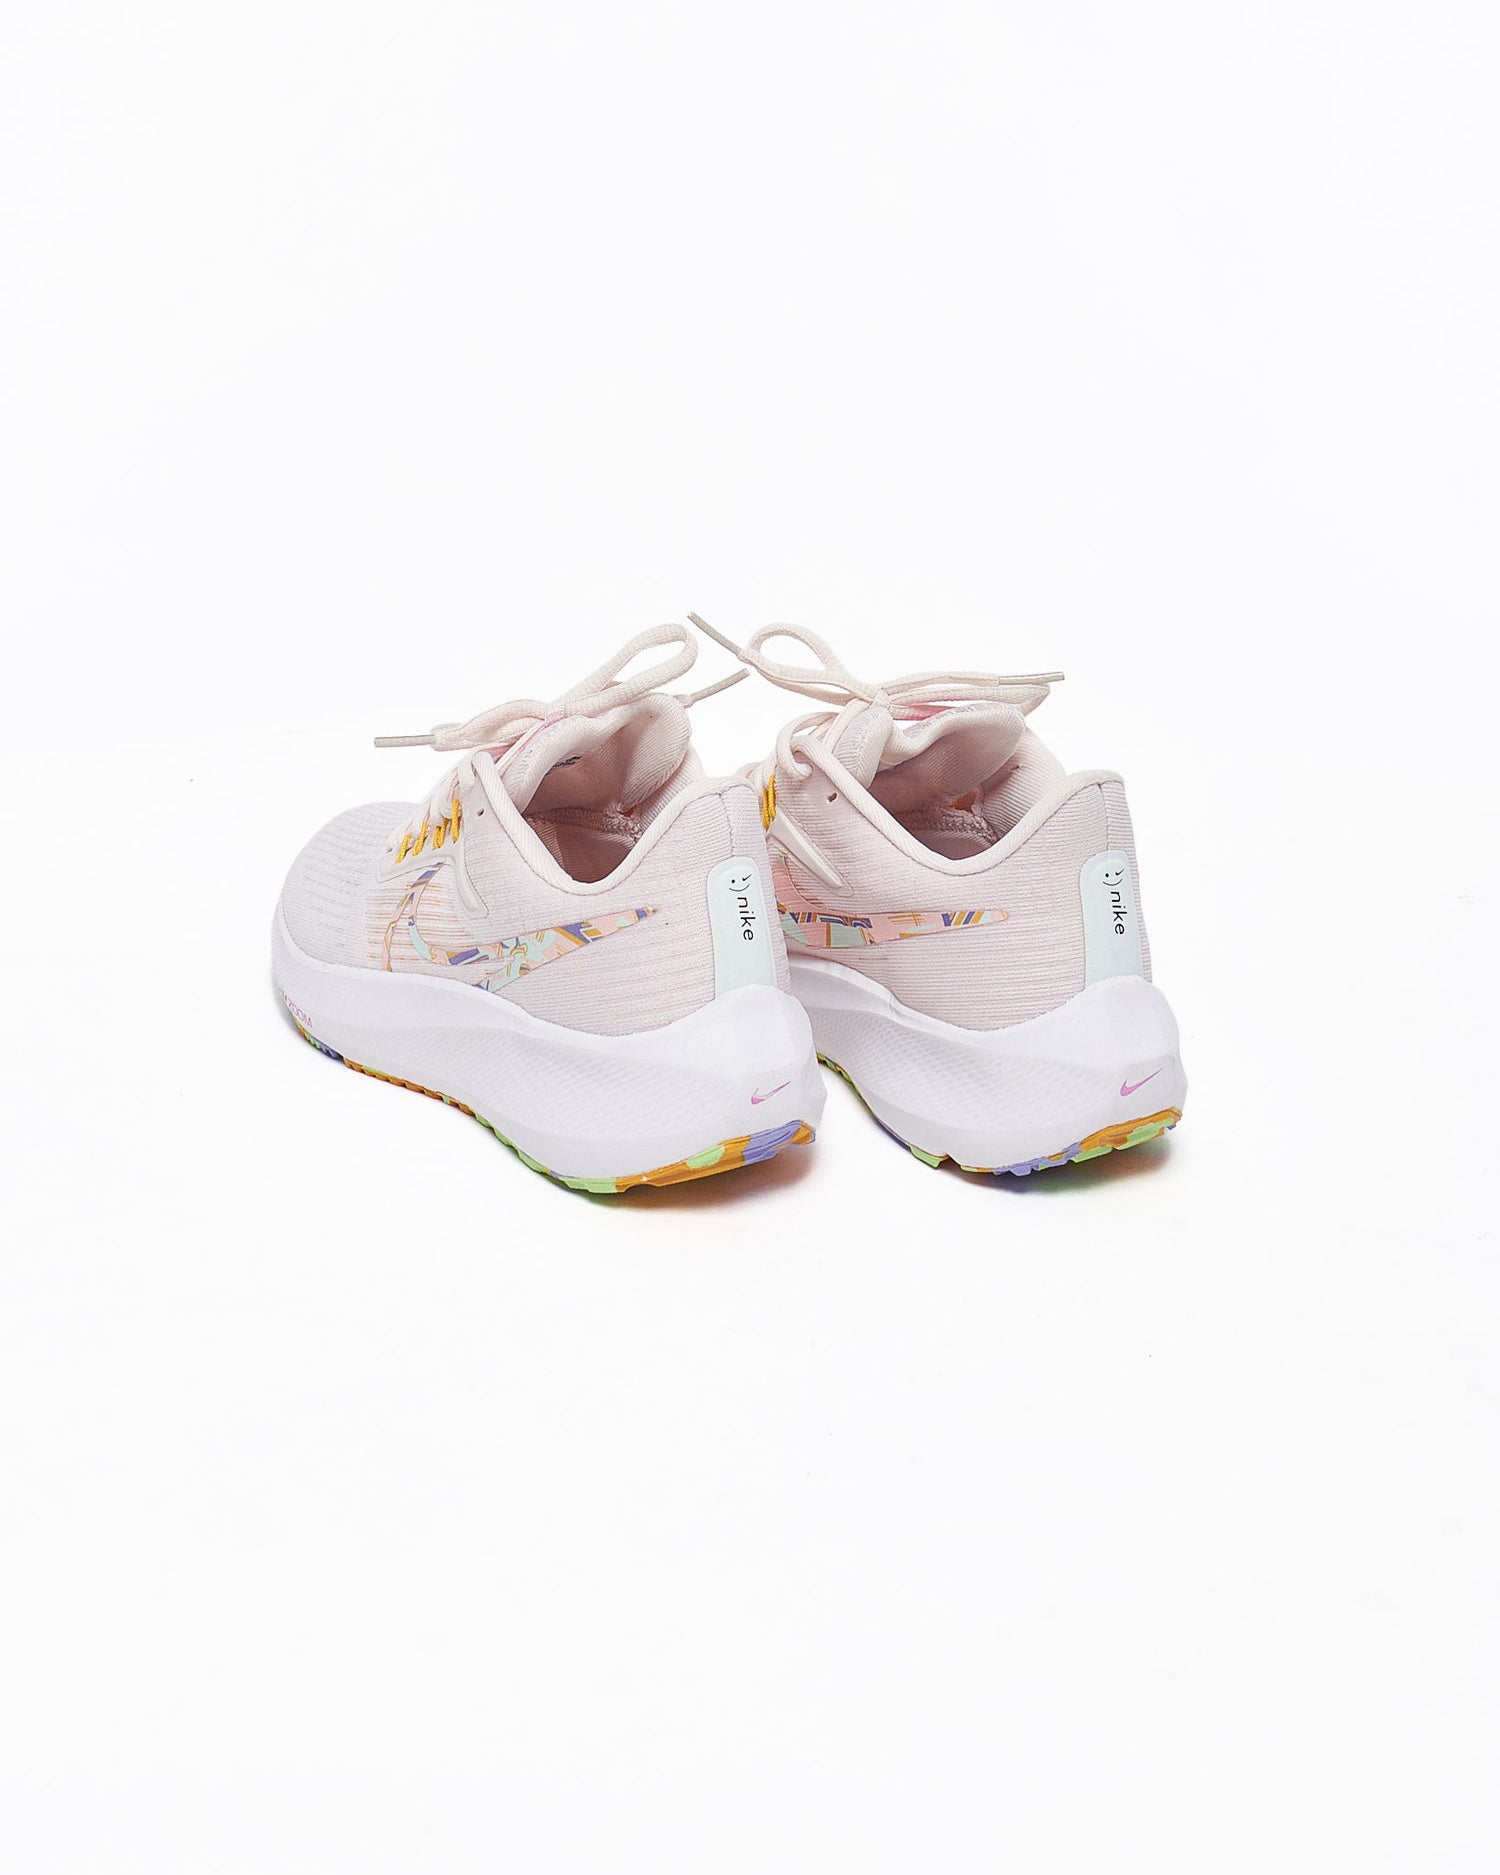 MOI OUTFIT-Air Zoom Pegasus Lady Shoes 65.90